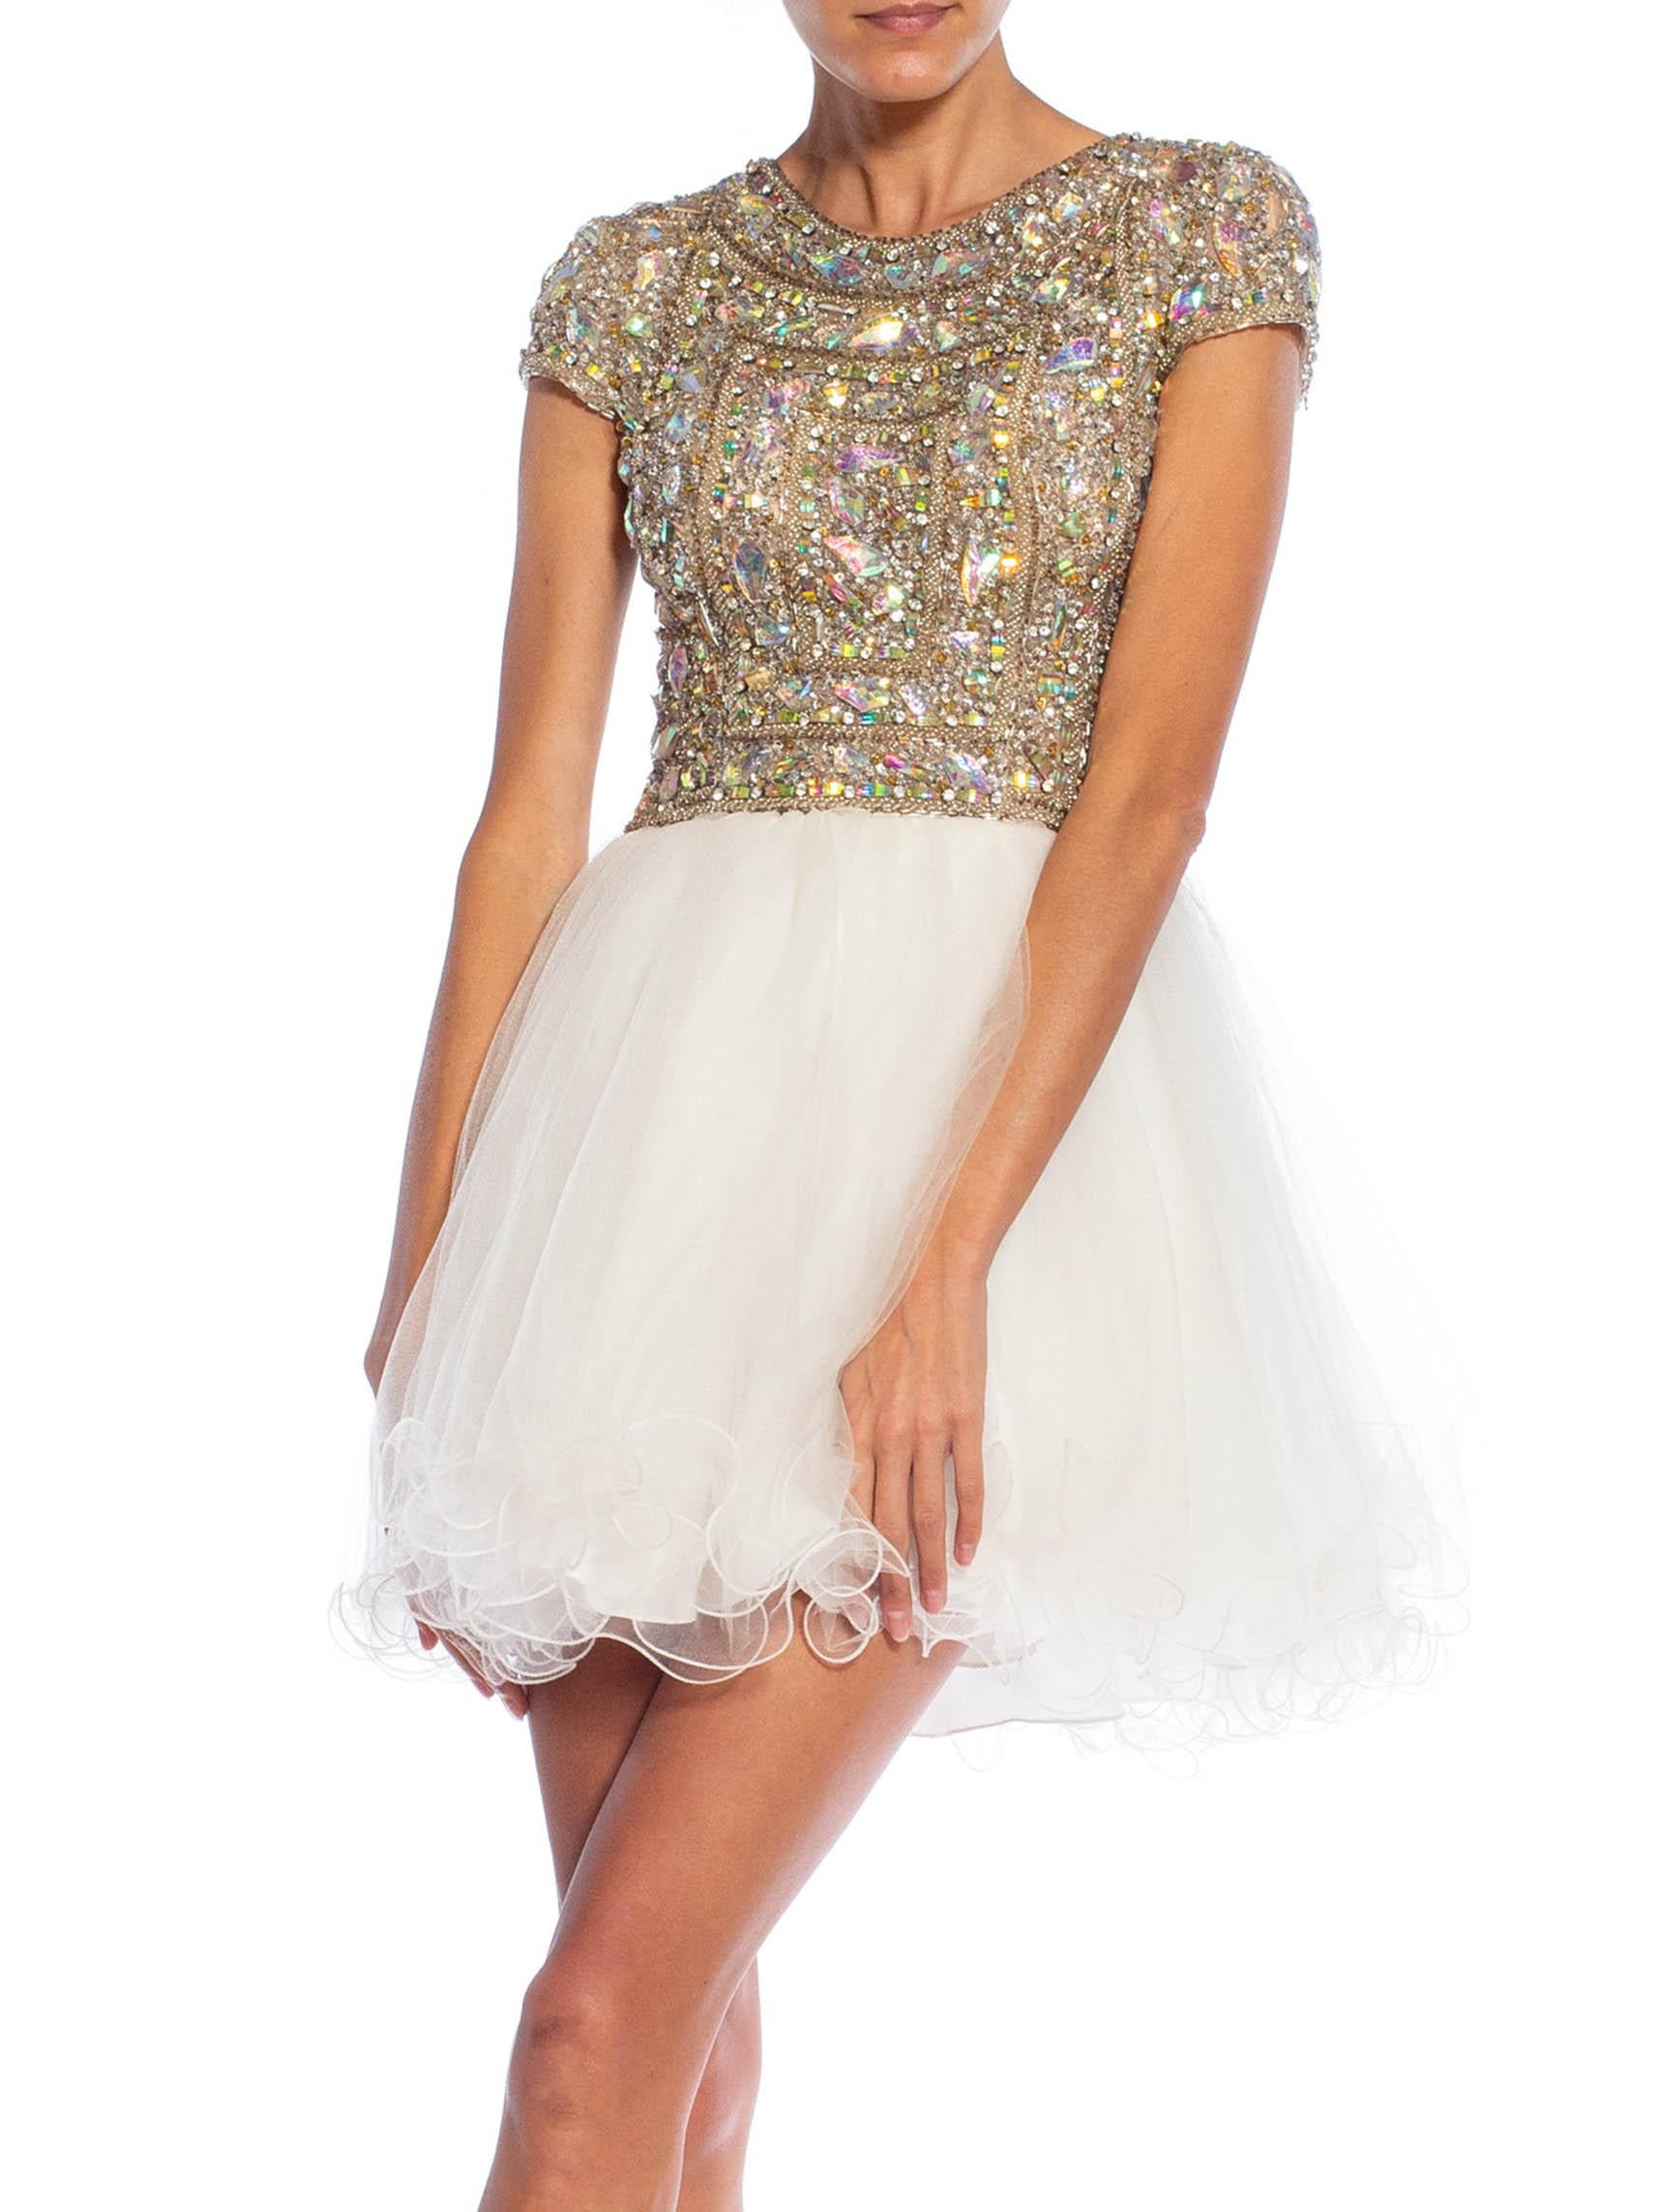 2010S Silver & White Beaded Tulle Cocktail Dress For Sale 5